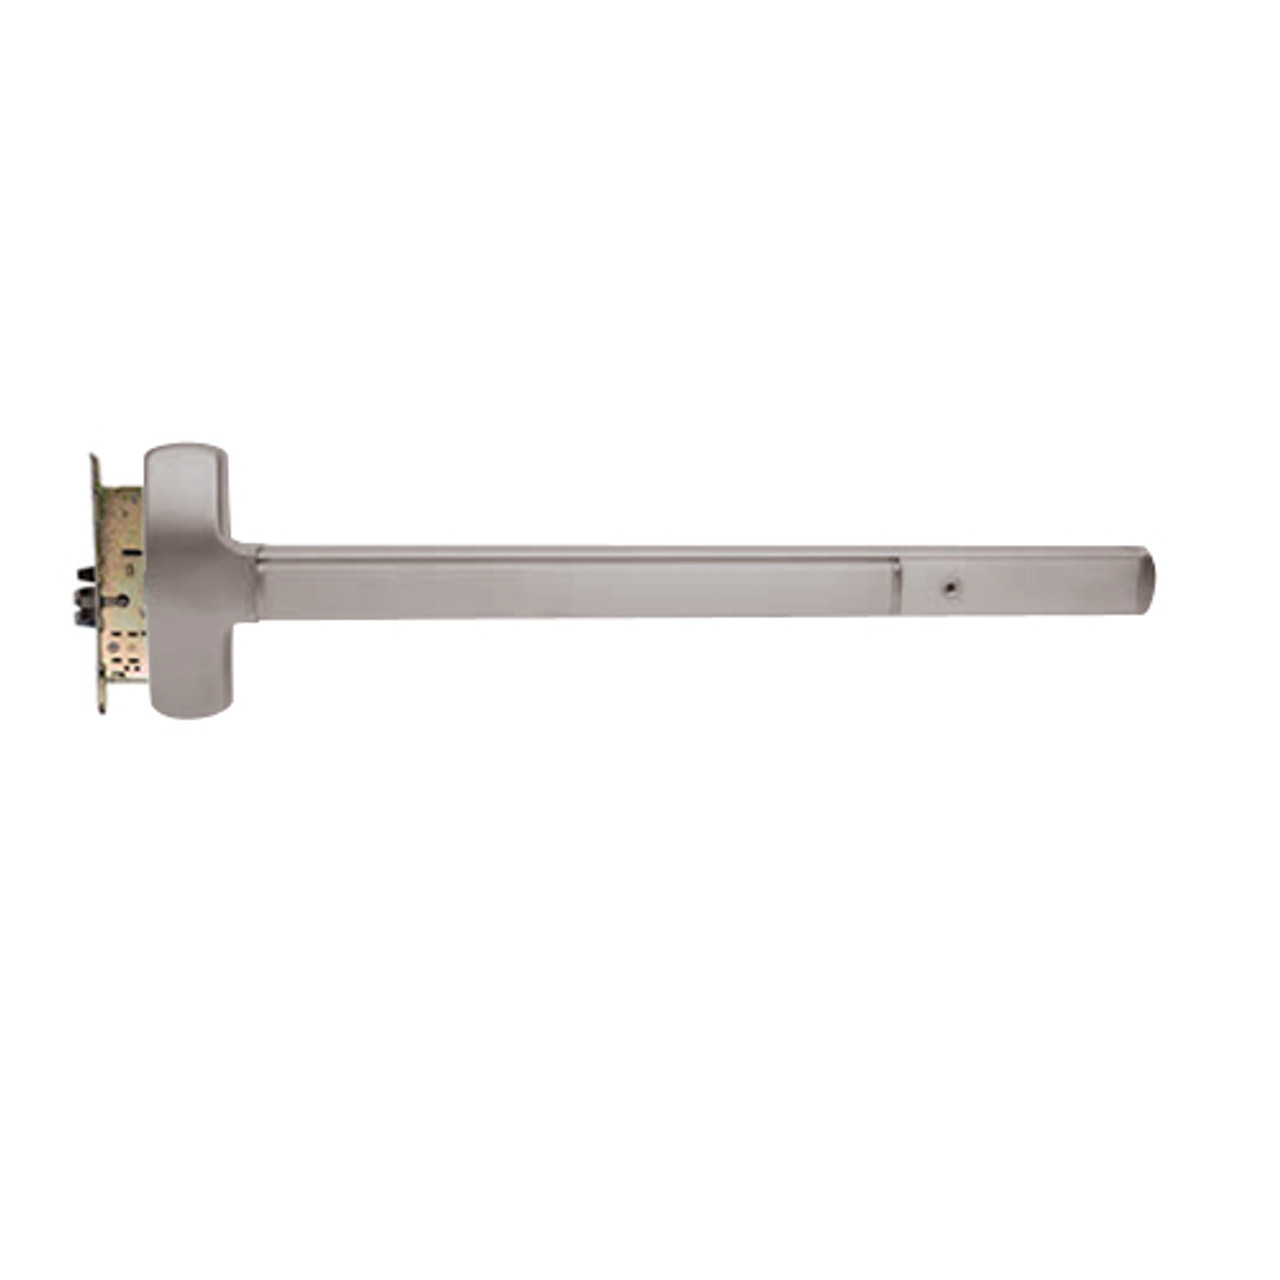 25-M-NL-OP-US28-3-LHR Falcon Exit Device in Anodized Aluminum